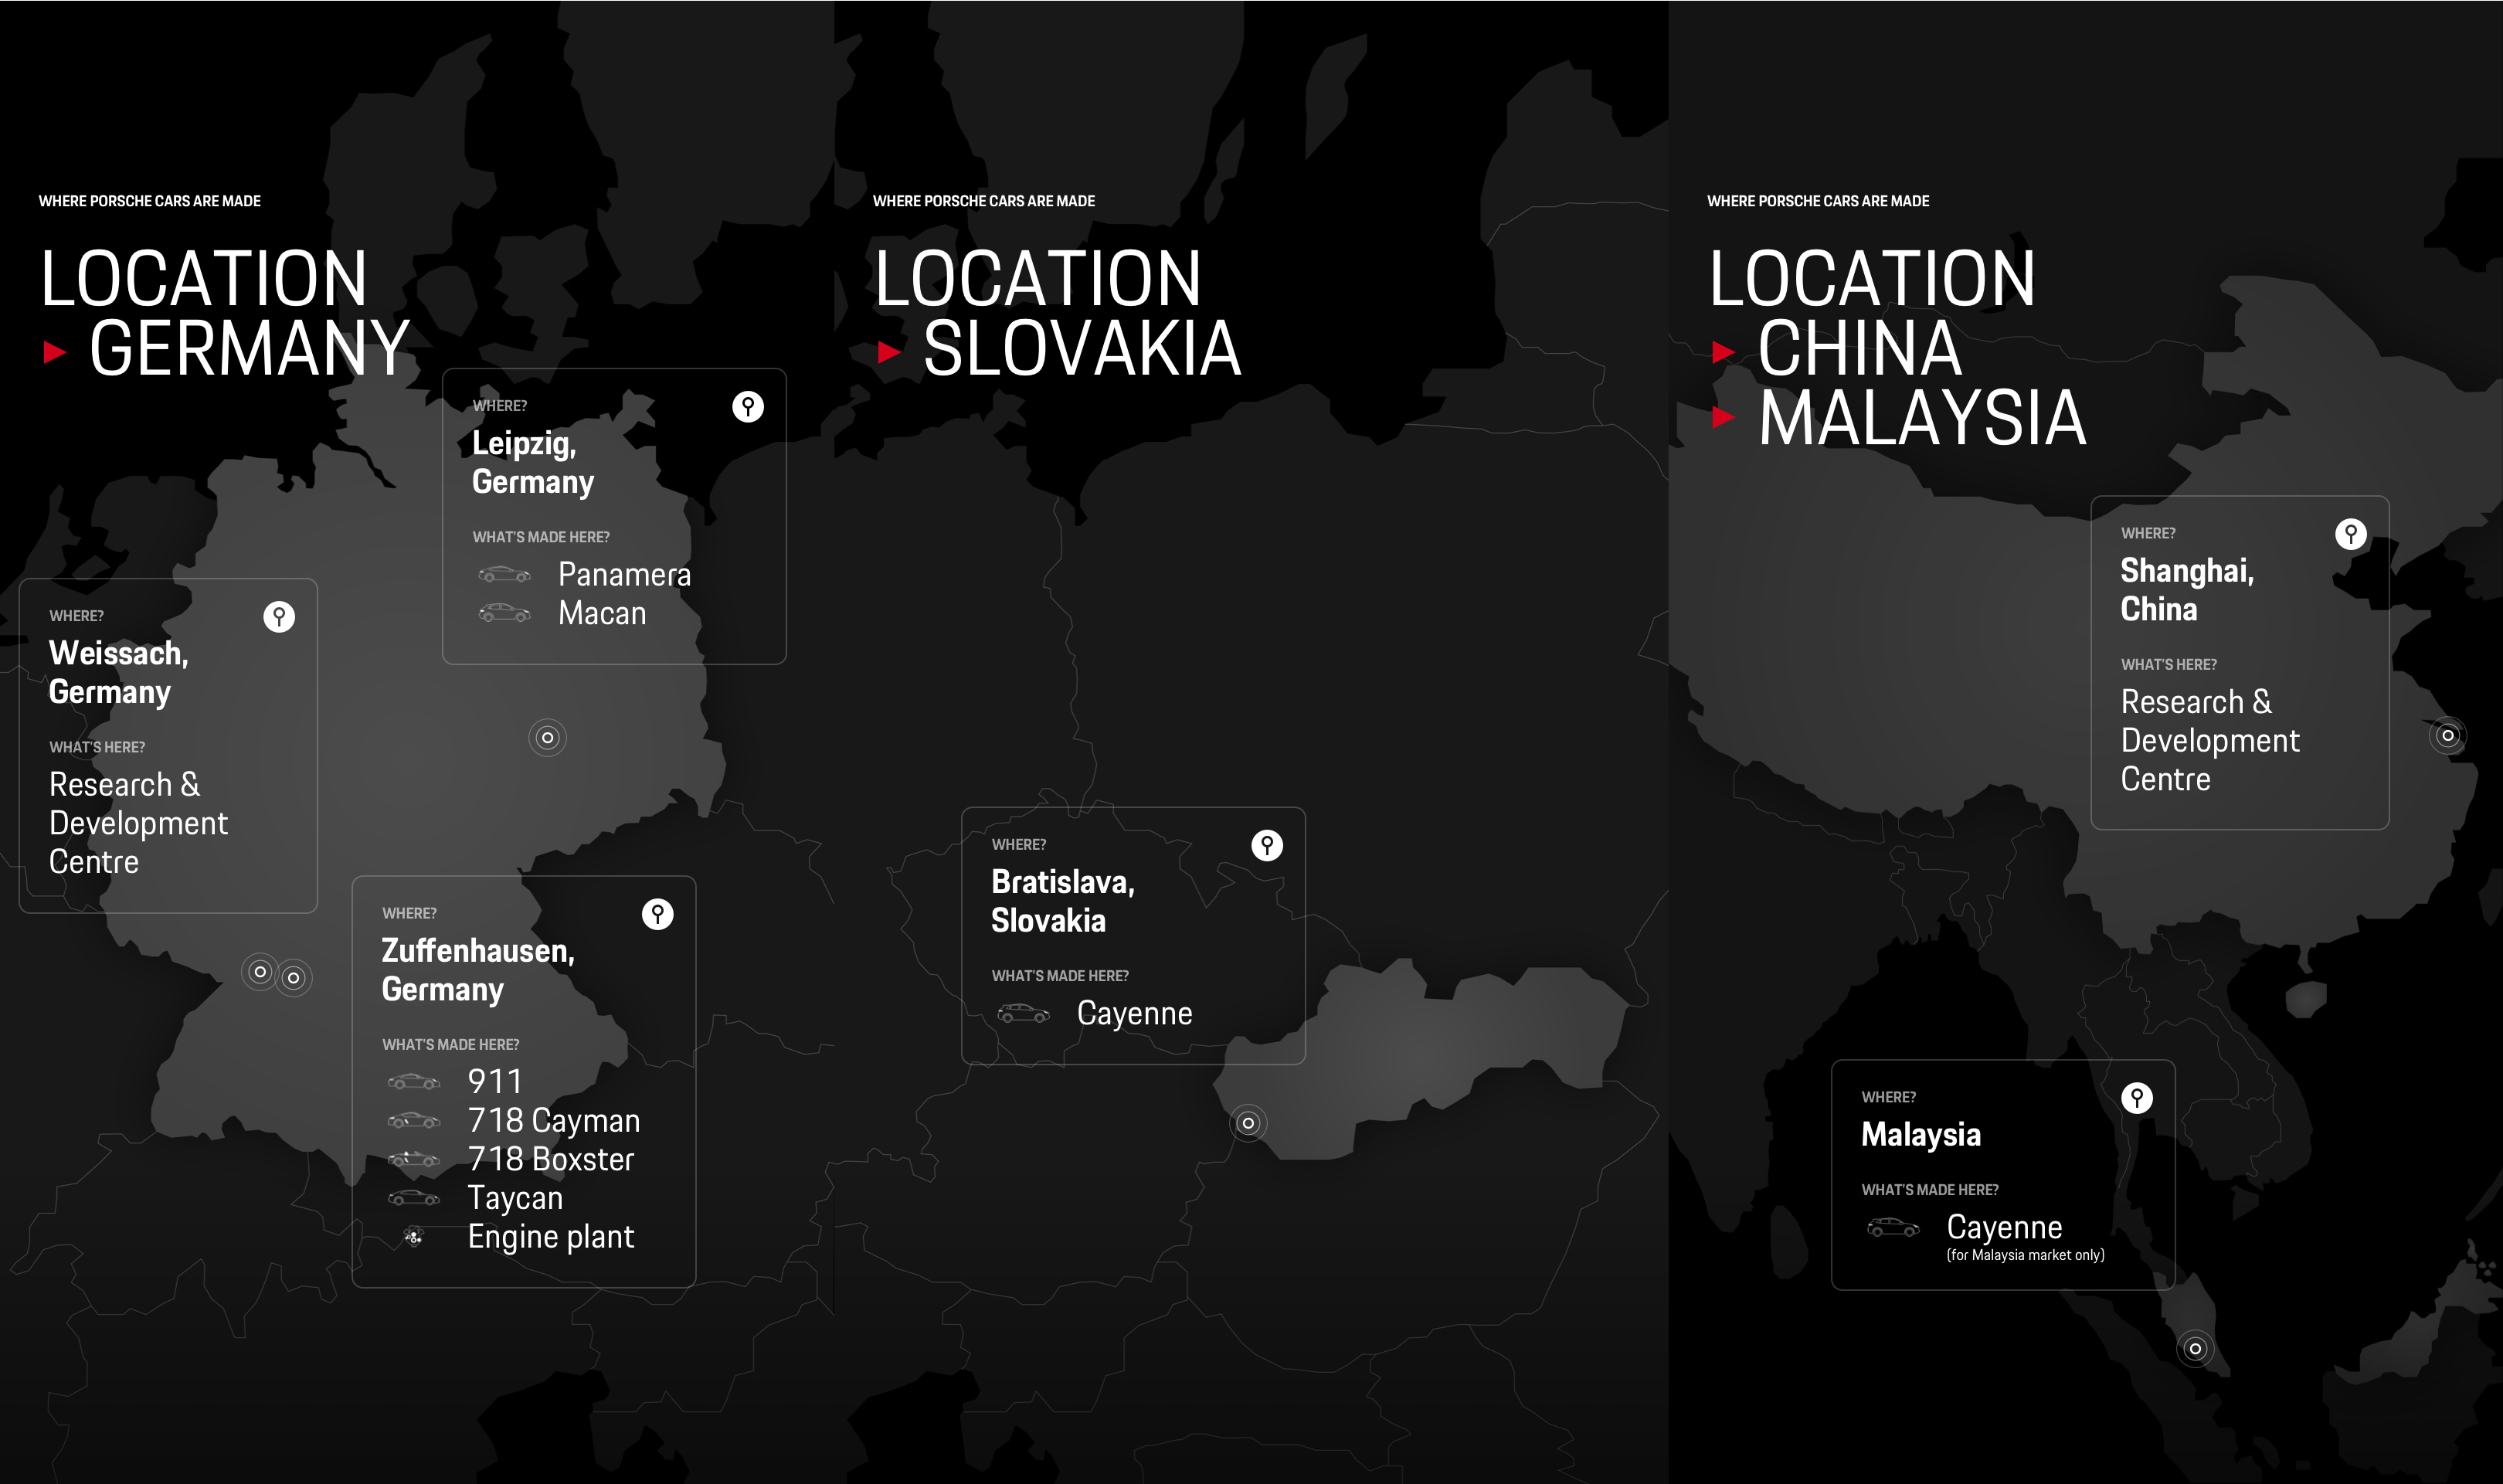 Graphic of global Porsche factories and China’s R&D location